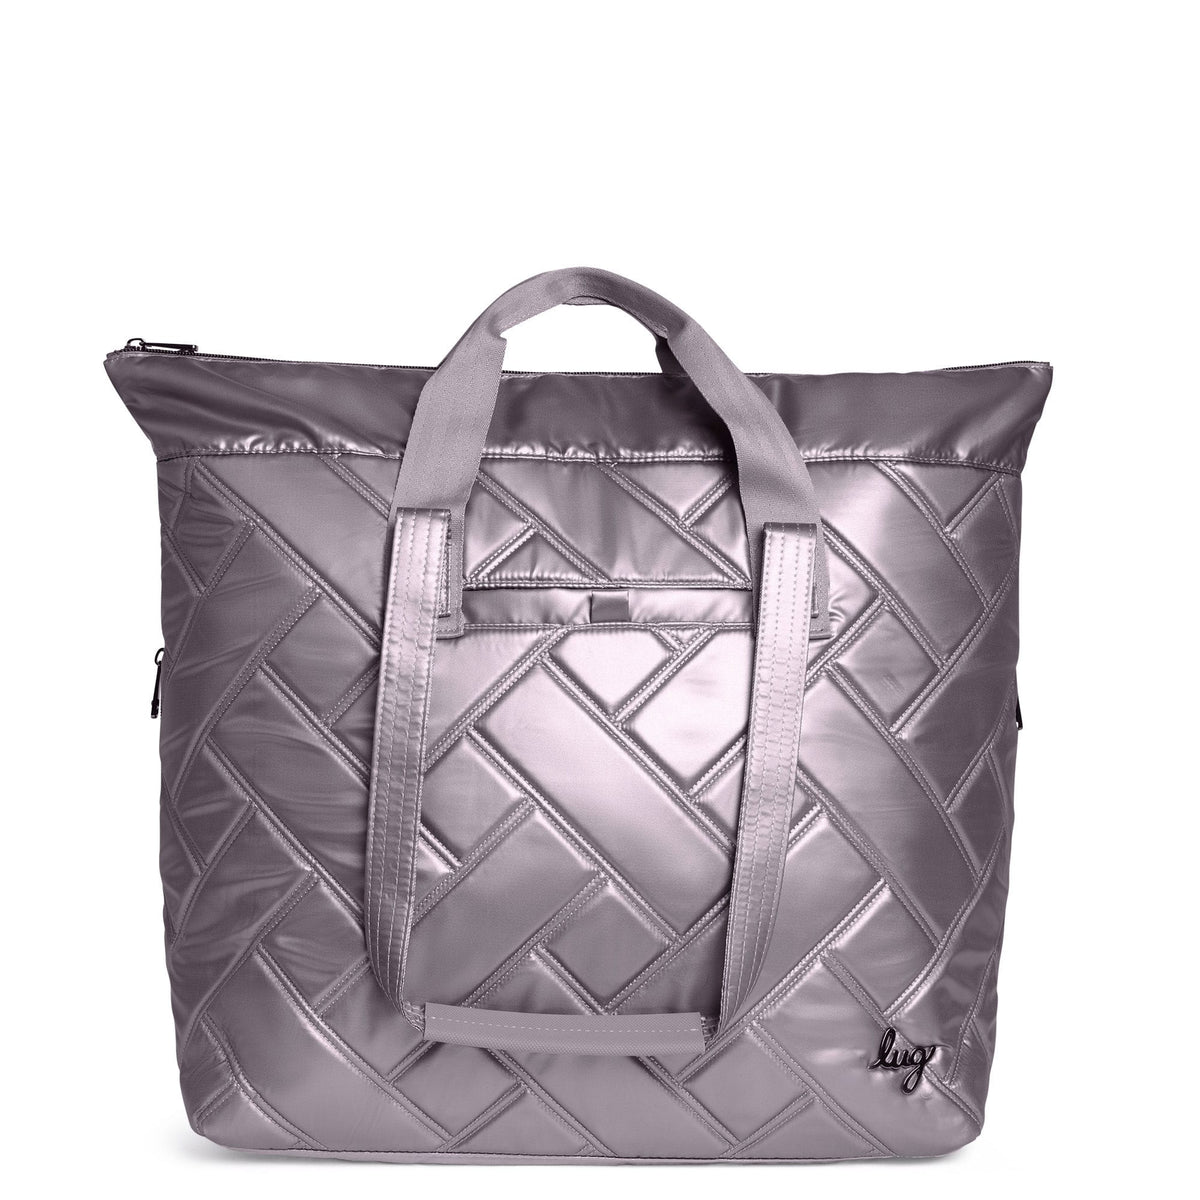 Ferry XL SE Expandable Carry-All Tote Bag